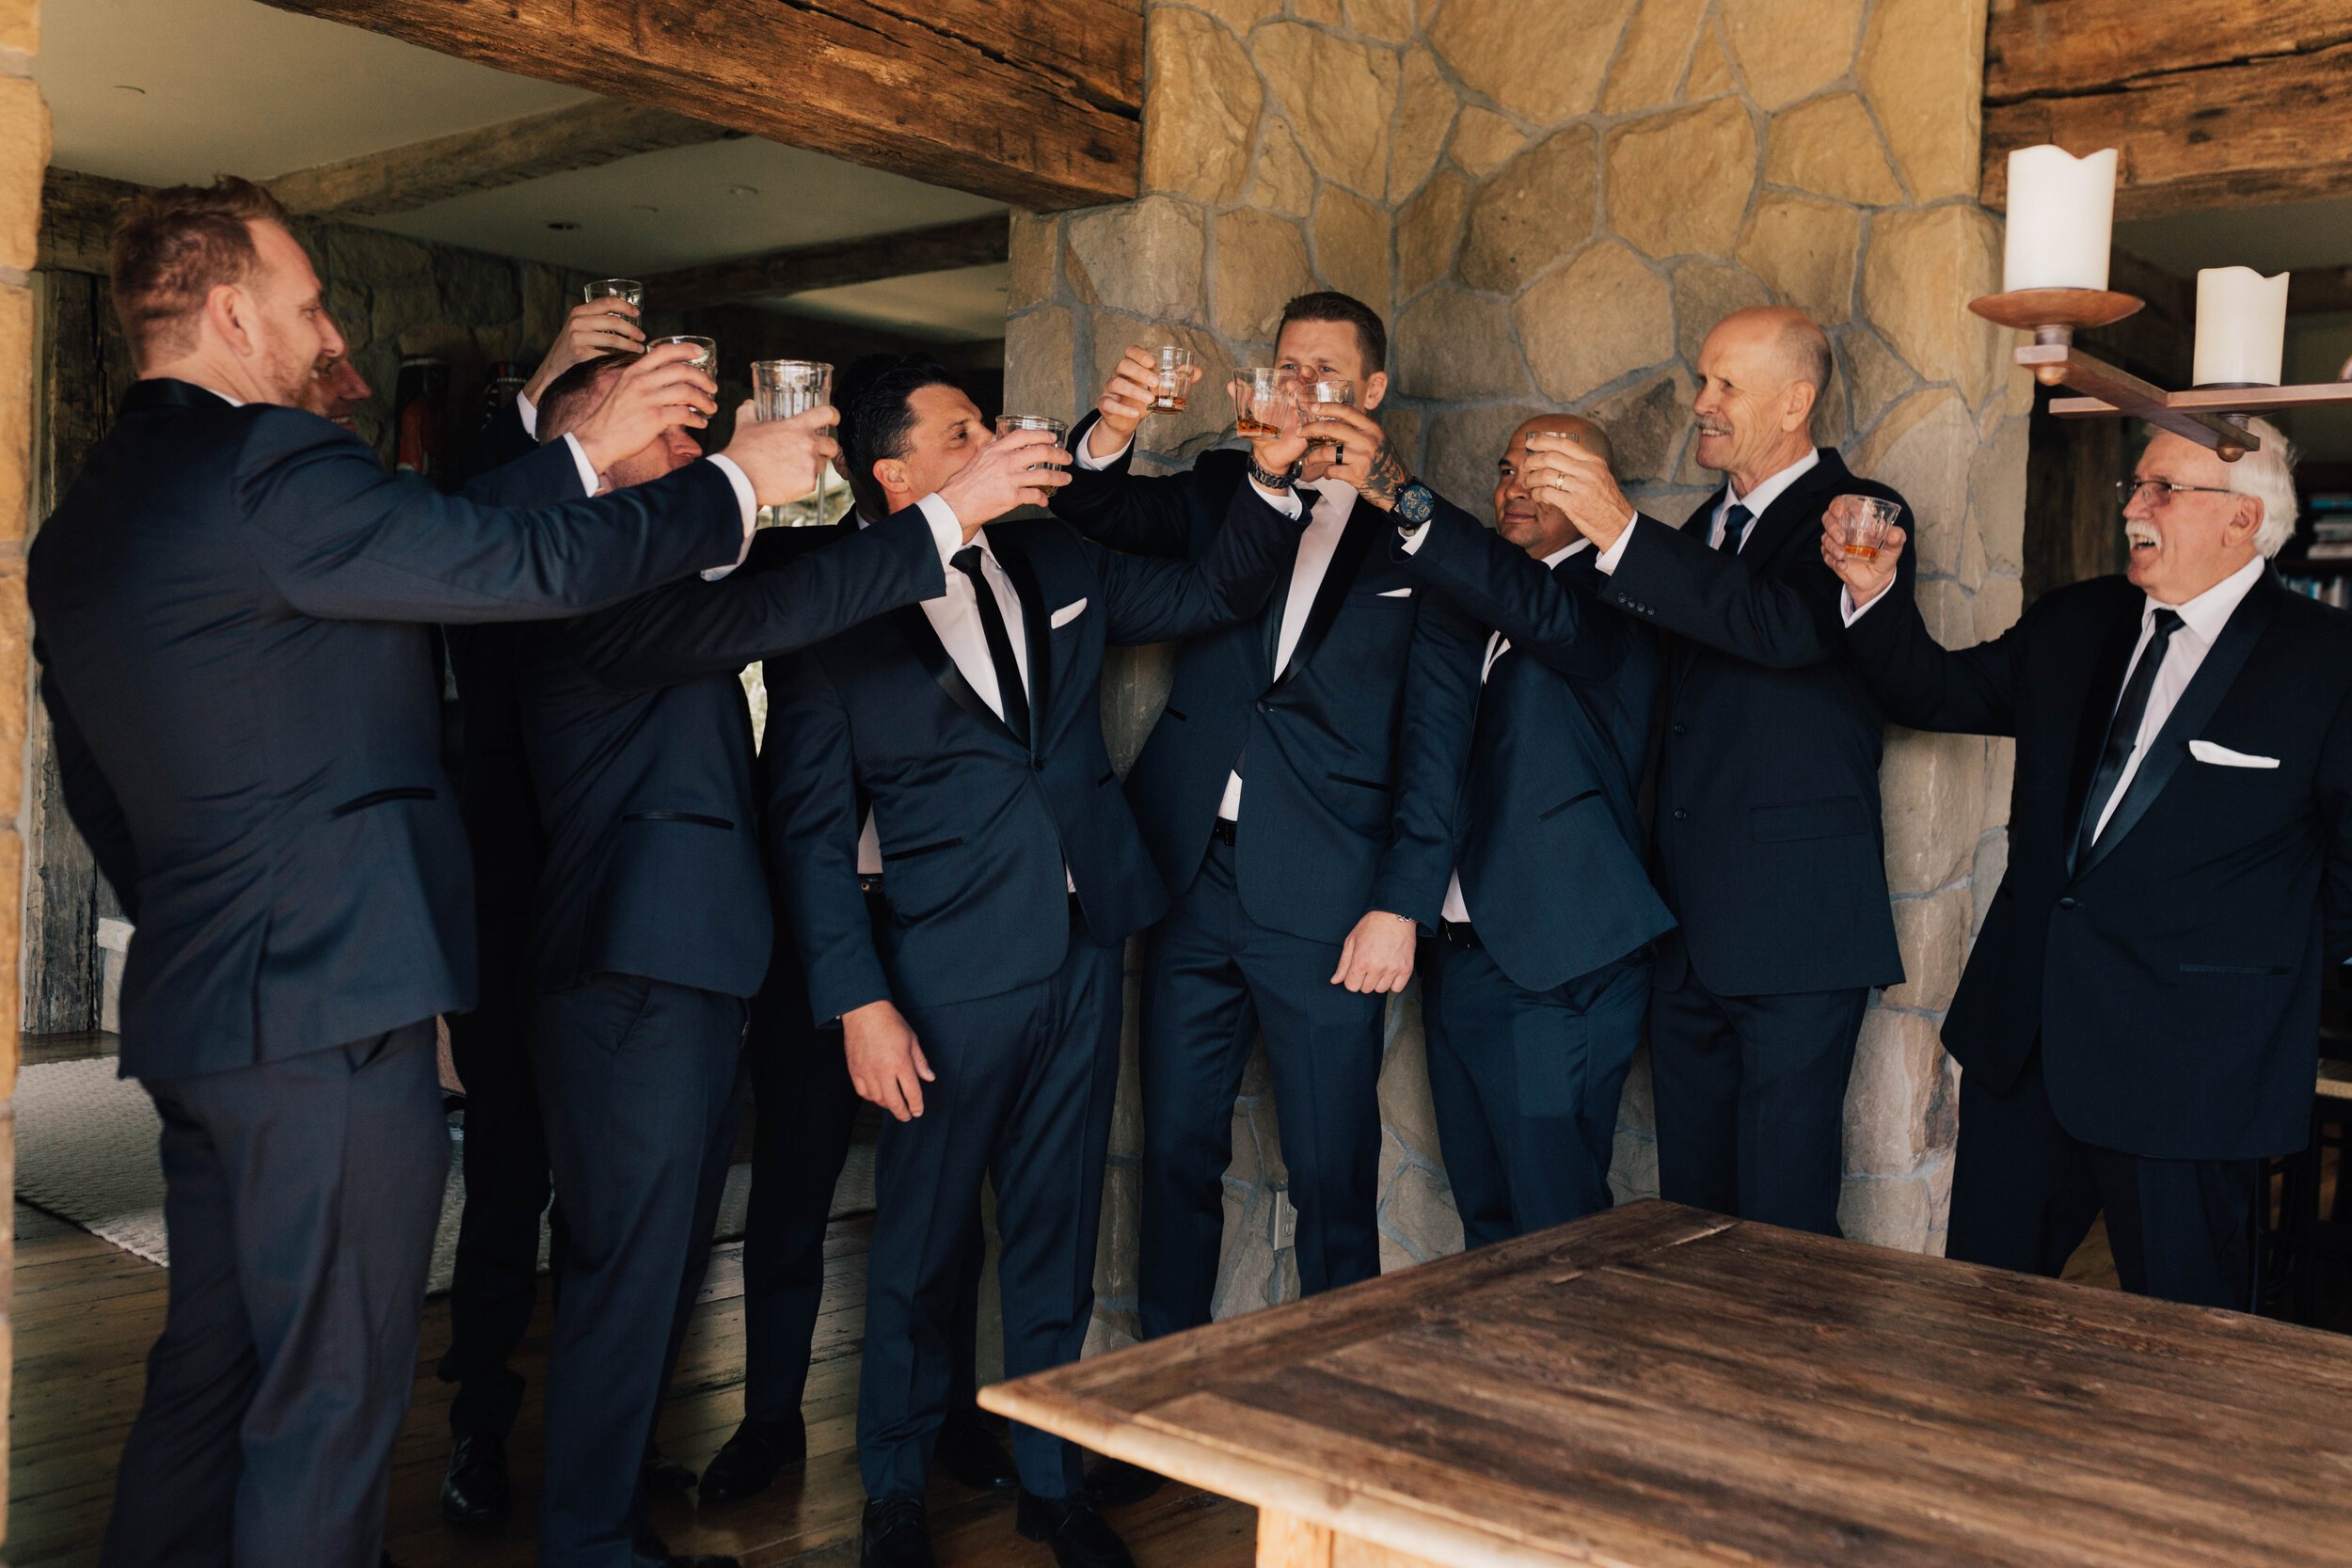 www.santabarbarawedding.com | Bria Peterson | Ocean View Farm | KB Events | Tangled Lotus | Groom Shares a Drink with Groomsmen Before the Ceremony 